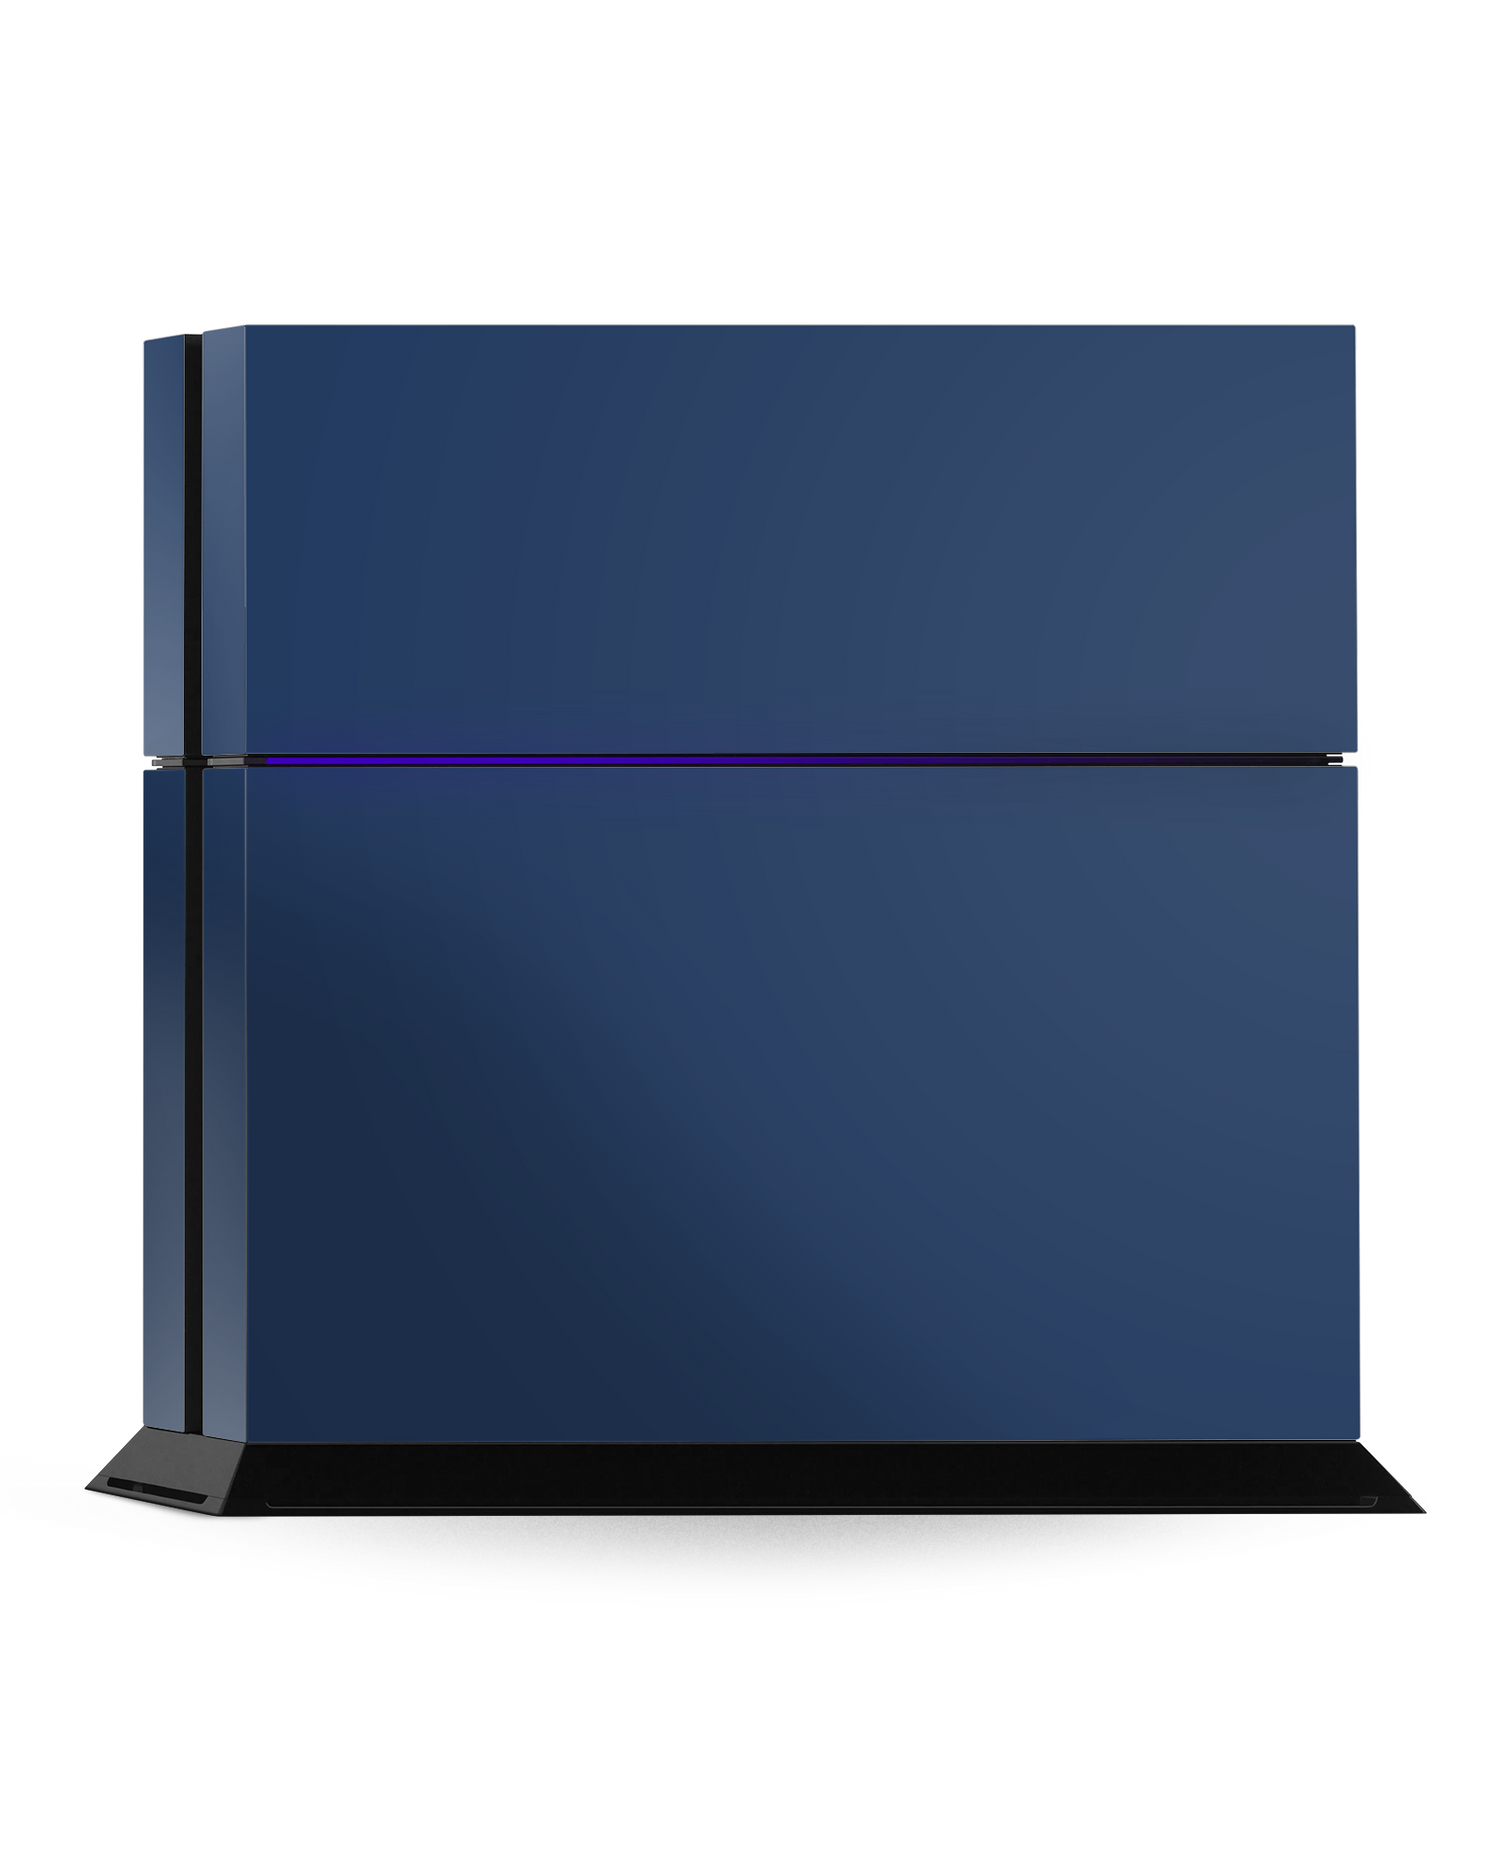 NAVY Console Skin for Sony PlayStation 4: Standing